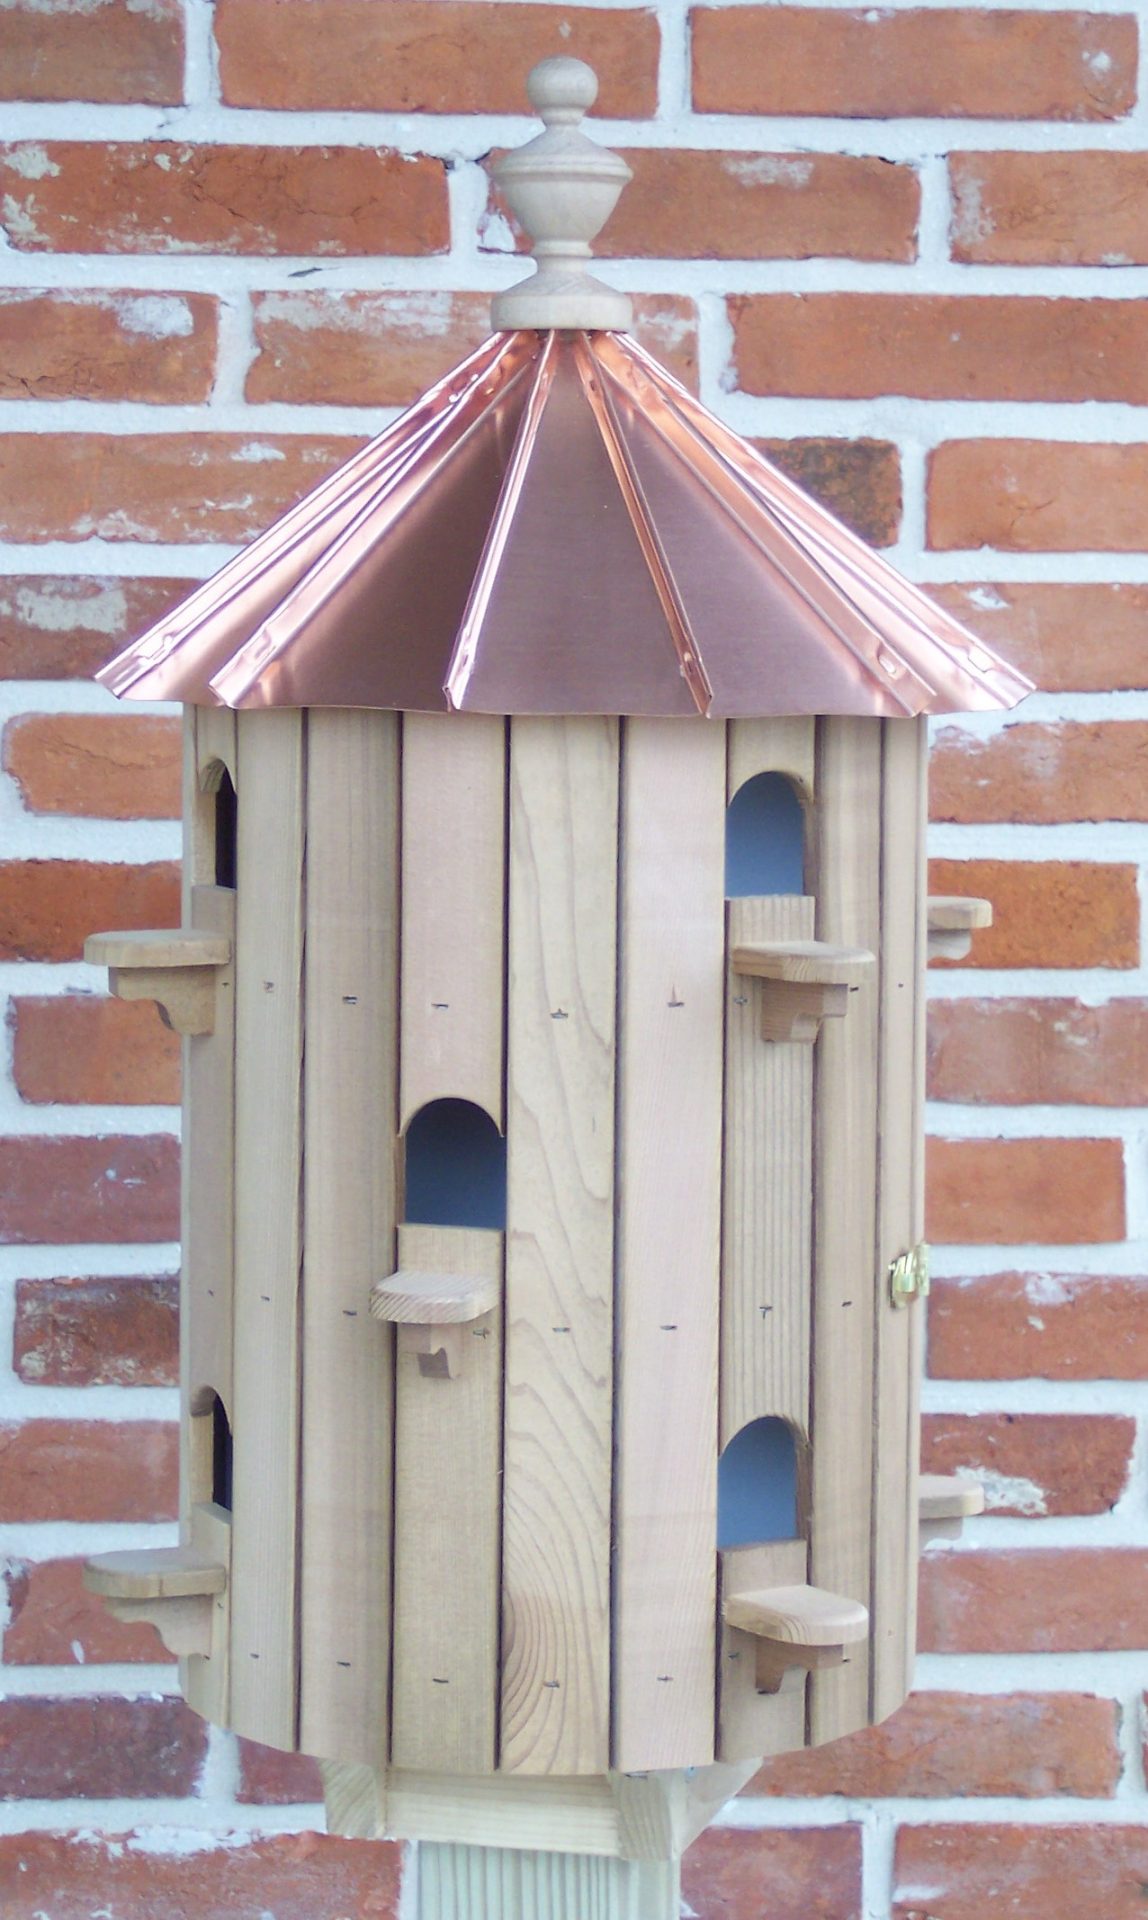 10-Hole Low-Roof Cedar Bird House with Copper Roof